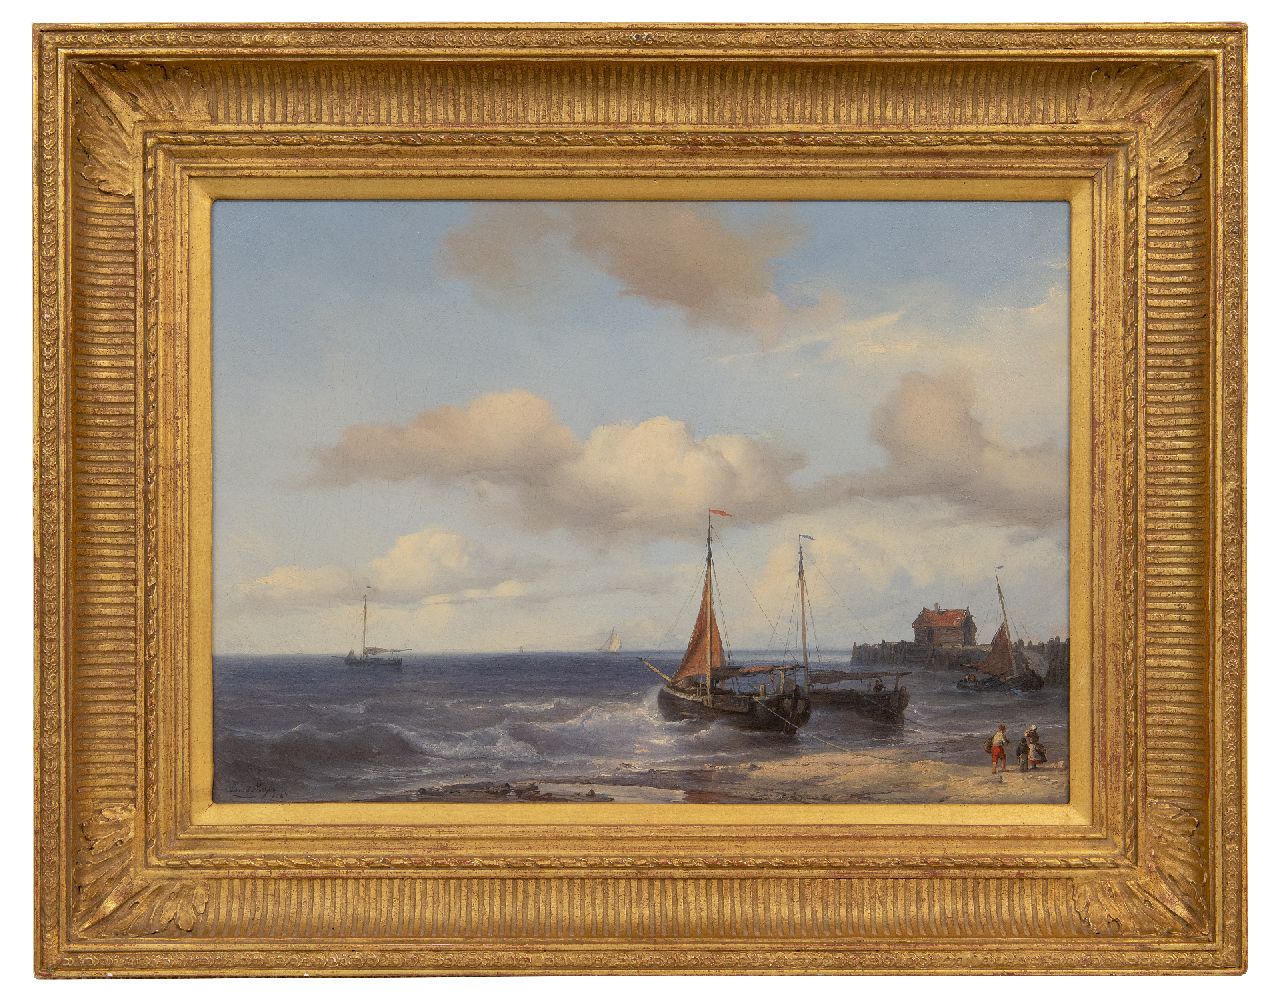 Meijer J.H.L.  | Johan Hendrik 'Louis' Meijer | Paintings offered for sale | Fishing ships in the breakers, oil on canvas 32.4 x 46.0 cm, signed l.l. and dated 1847